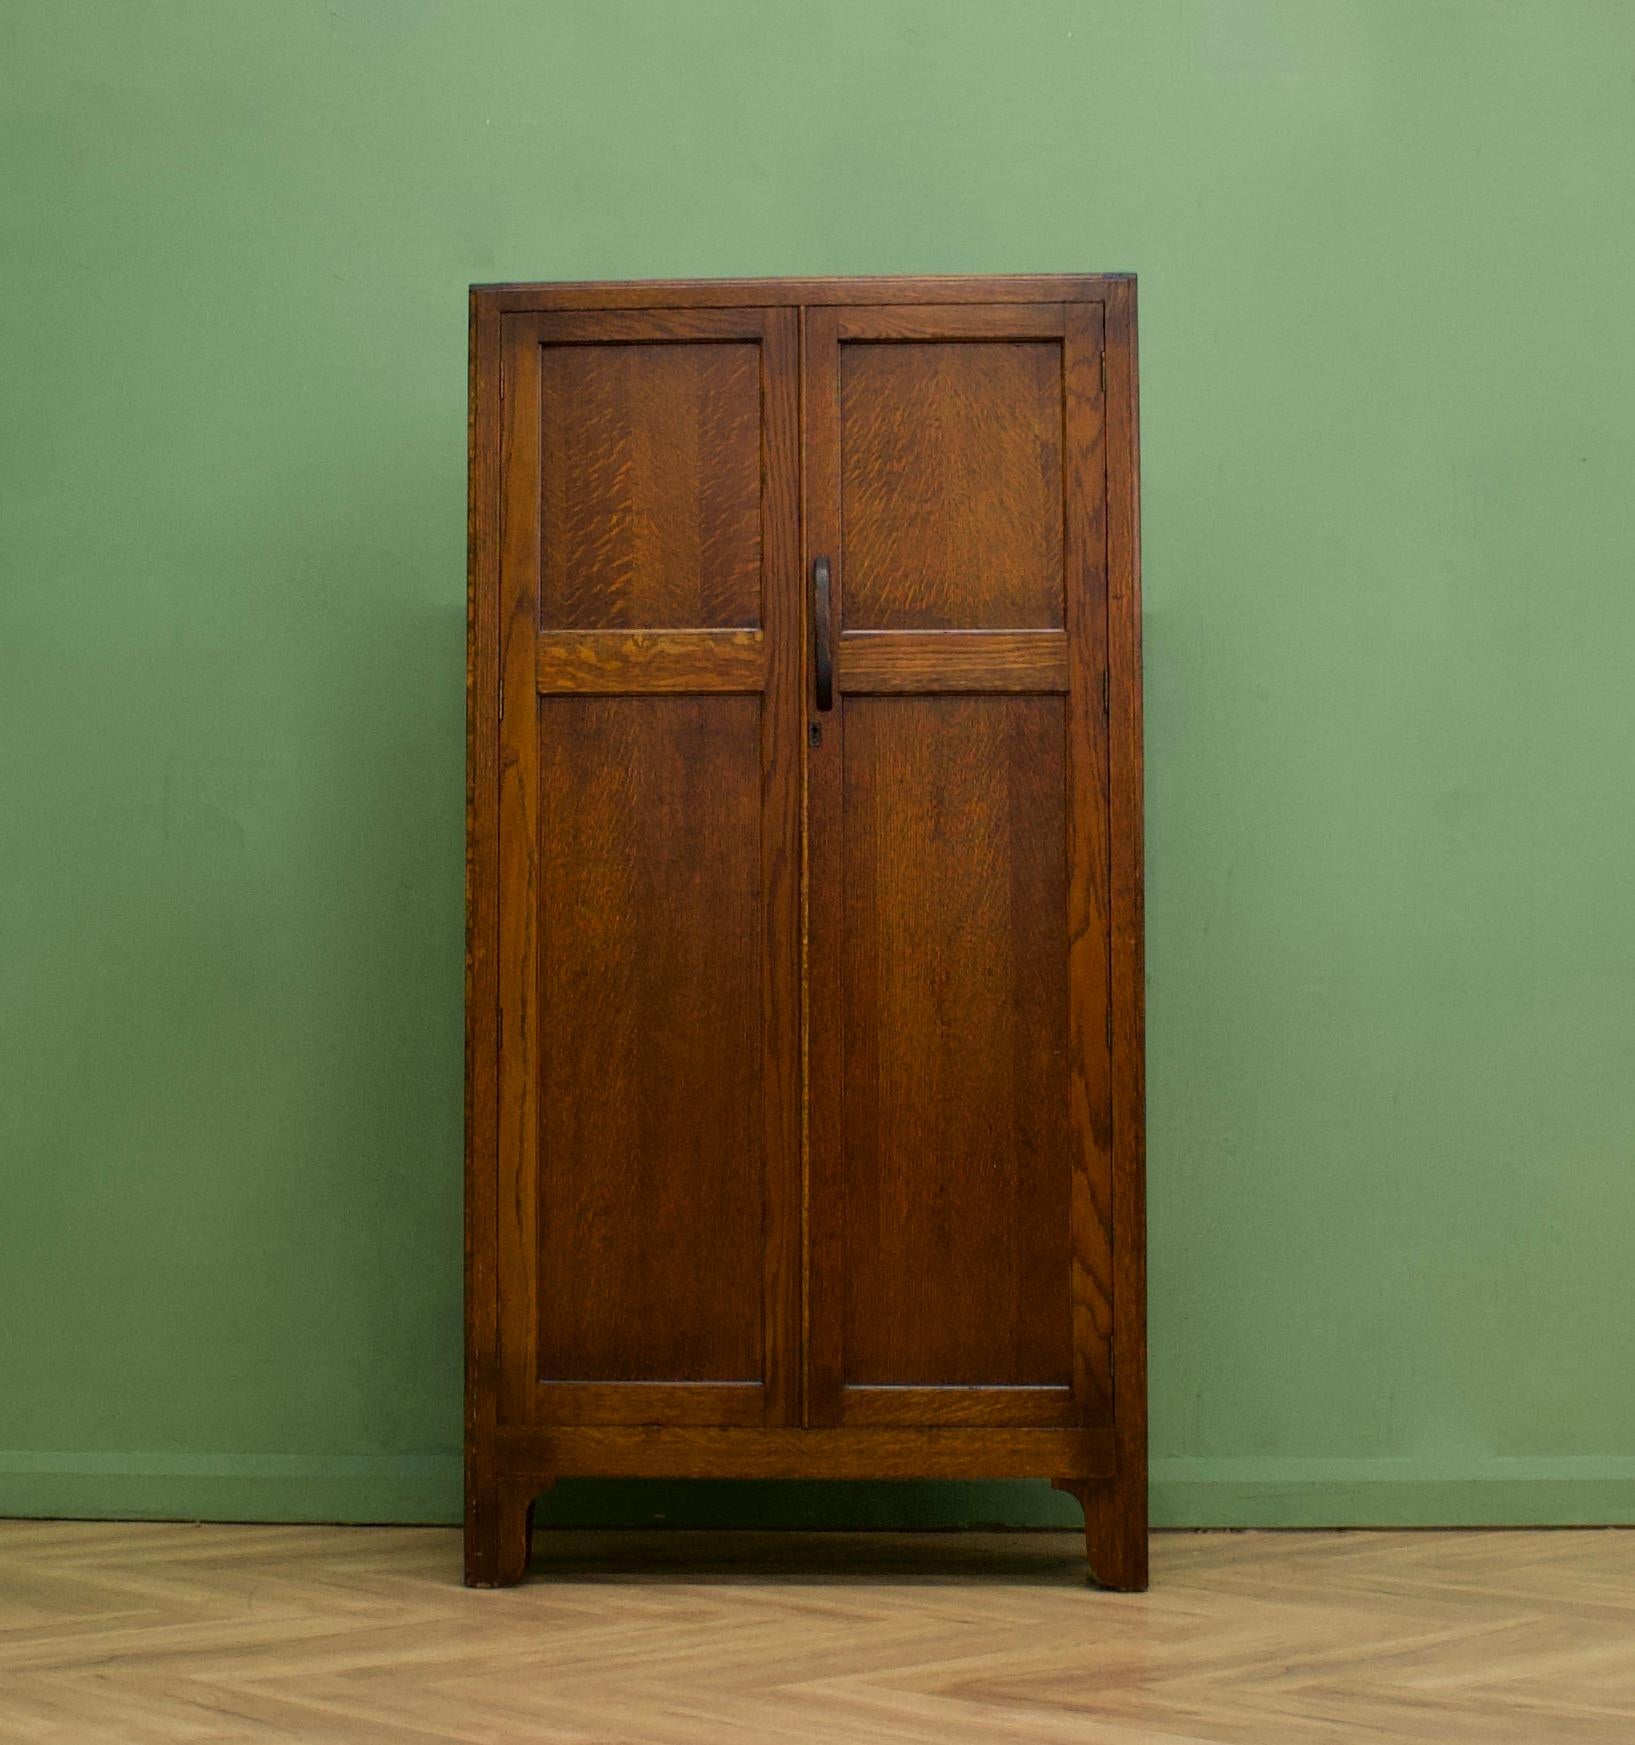 A beautiful quality and tone, Art Deco freestanding oak wardrobe - in the manner of Heals
Featuring a hanging rail, shoe rail, shelves and an integrated mirror